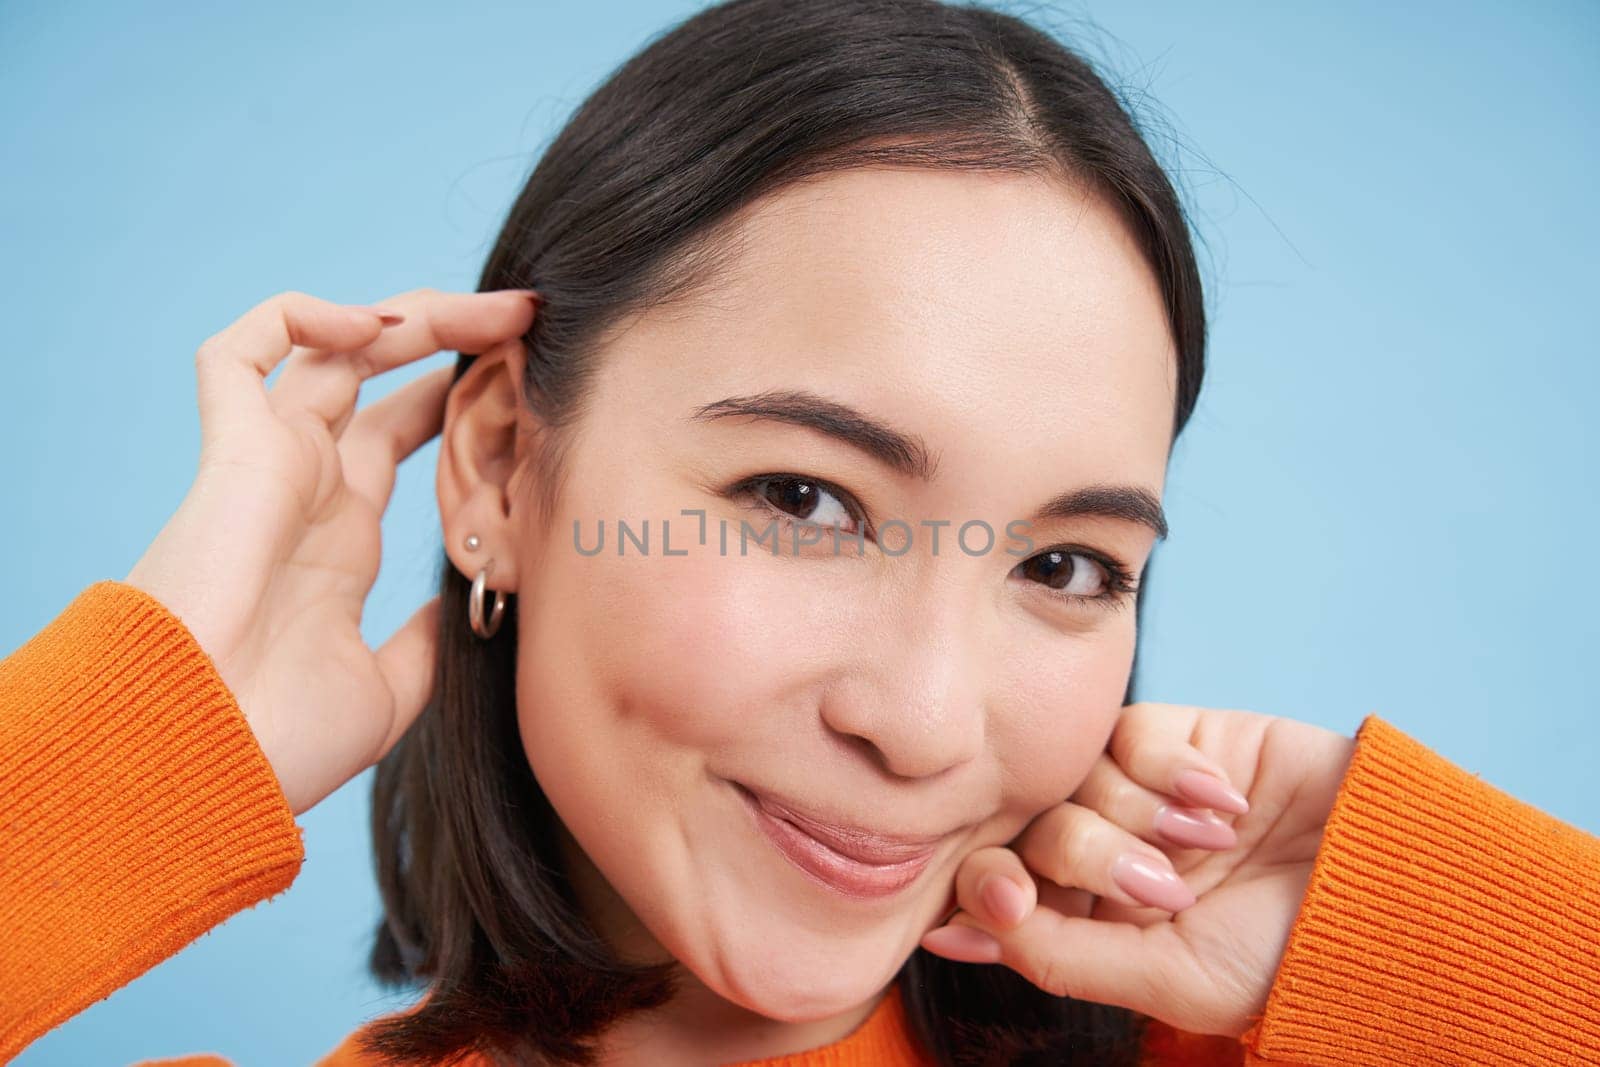 Beauty and skincare. Close up portrait of happy smiling japanese woman, touches her clear, glowing skin, natural healthy face, standing over blue background.